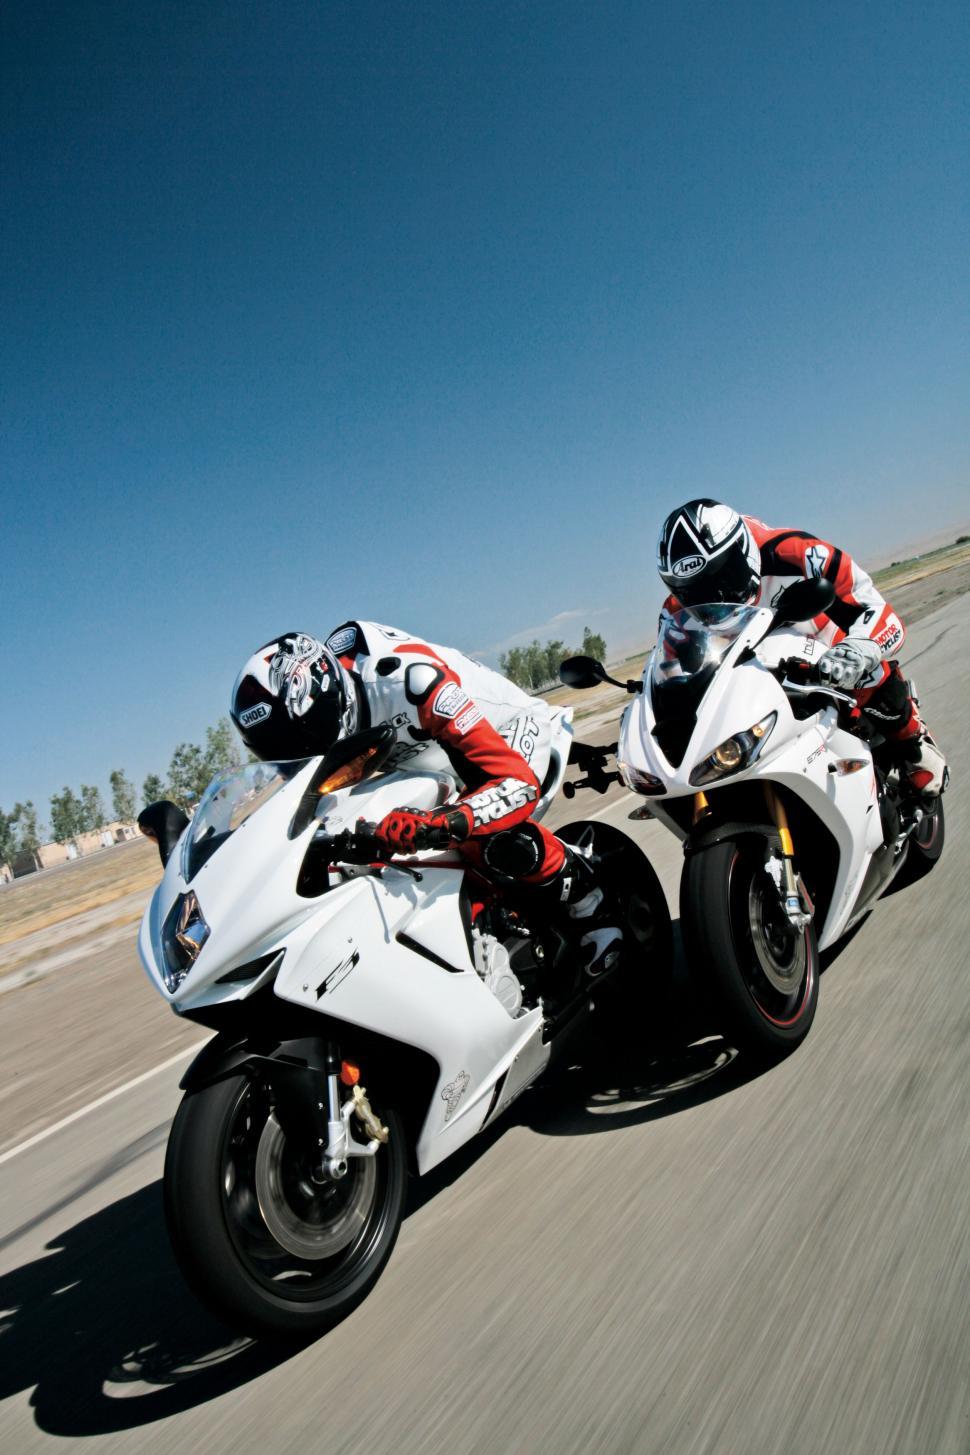 Free Image of Two People Riding Motorcycles on a Road 